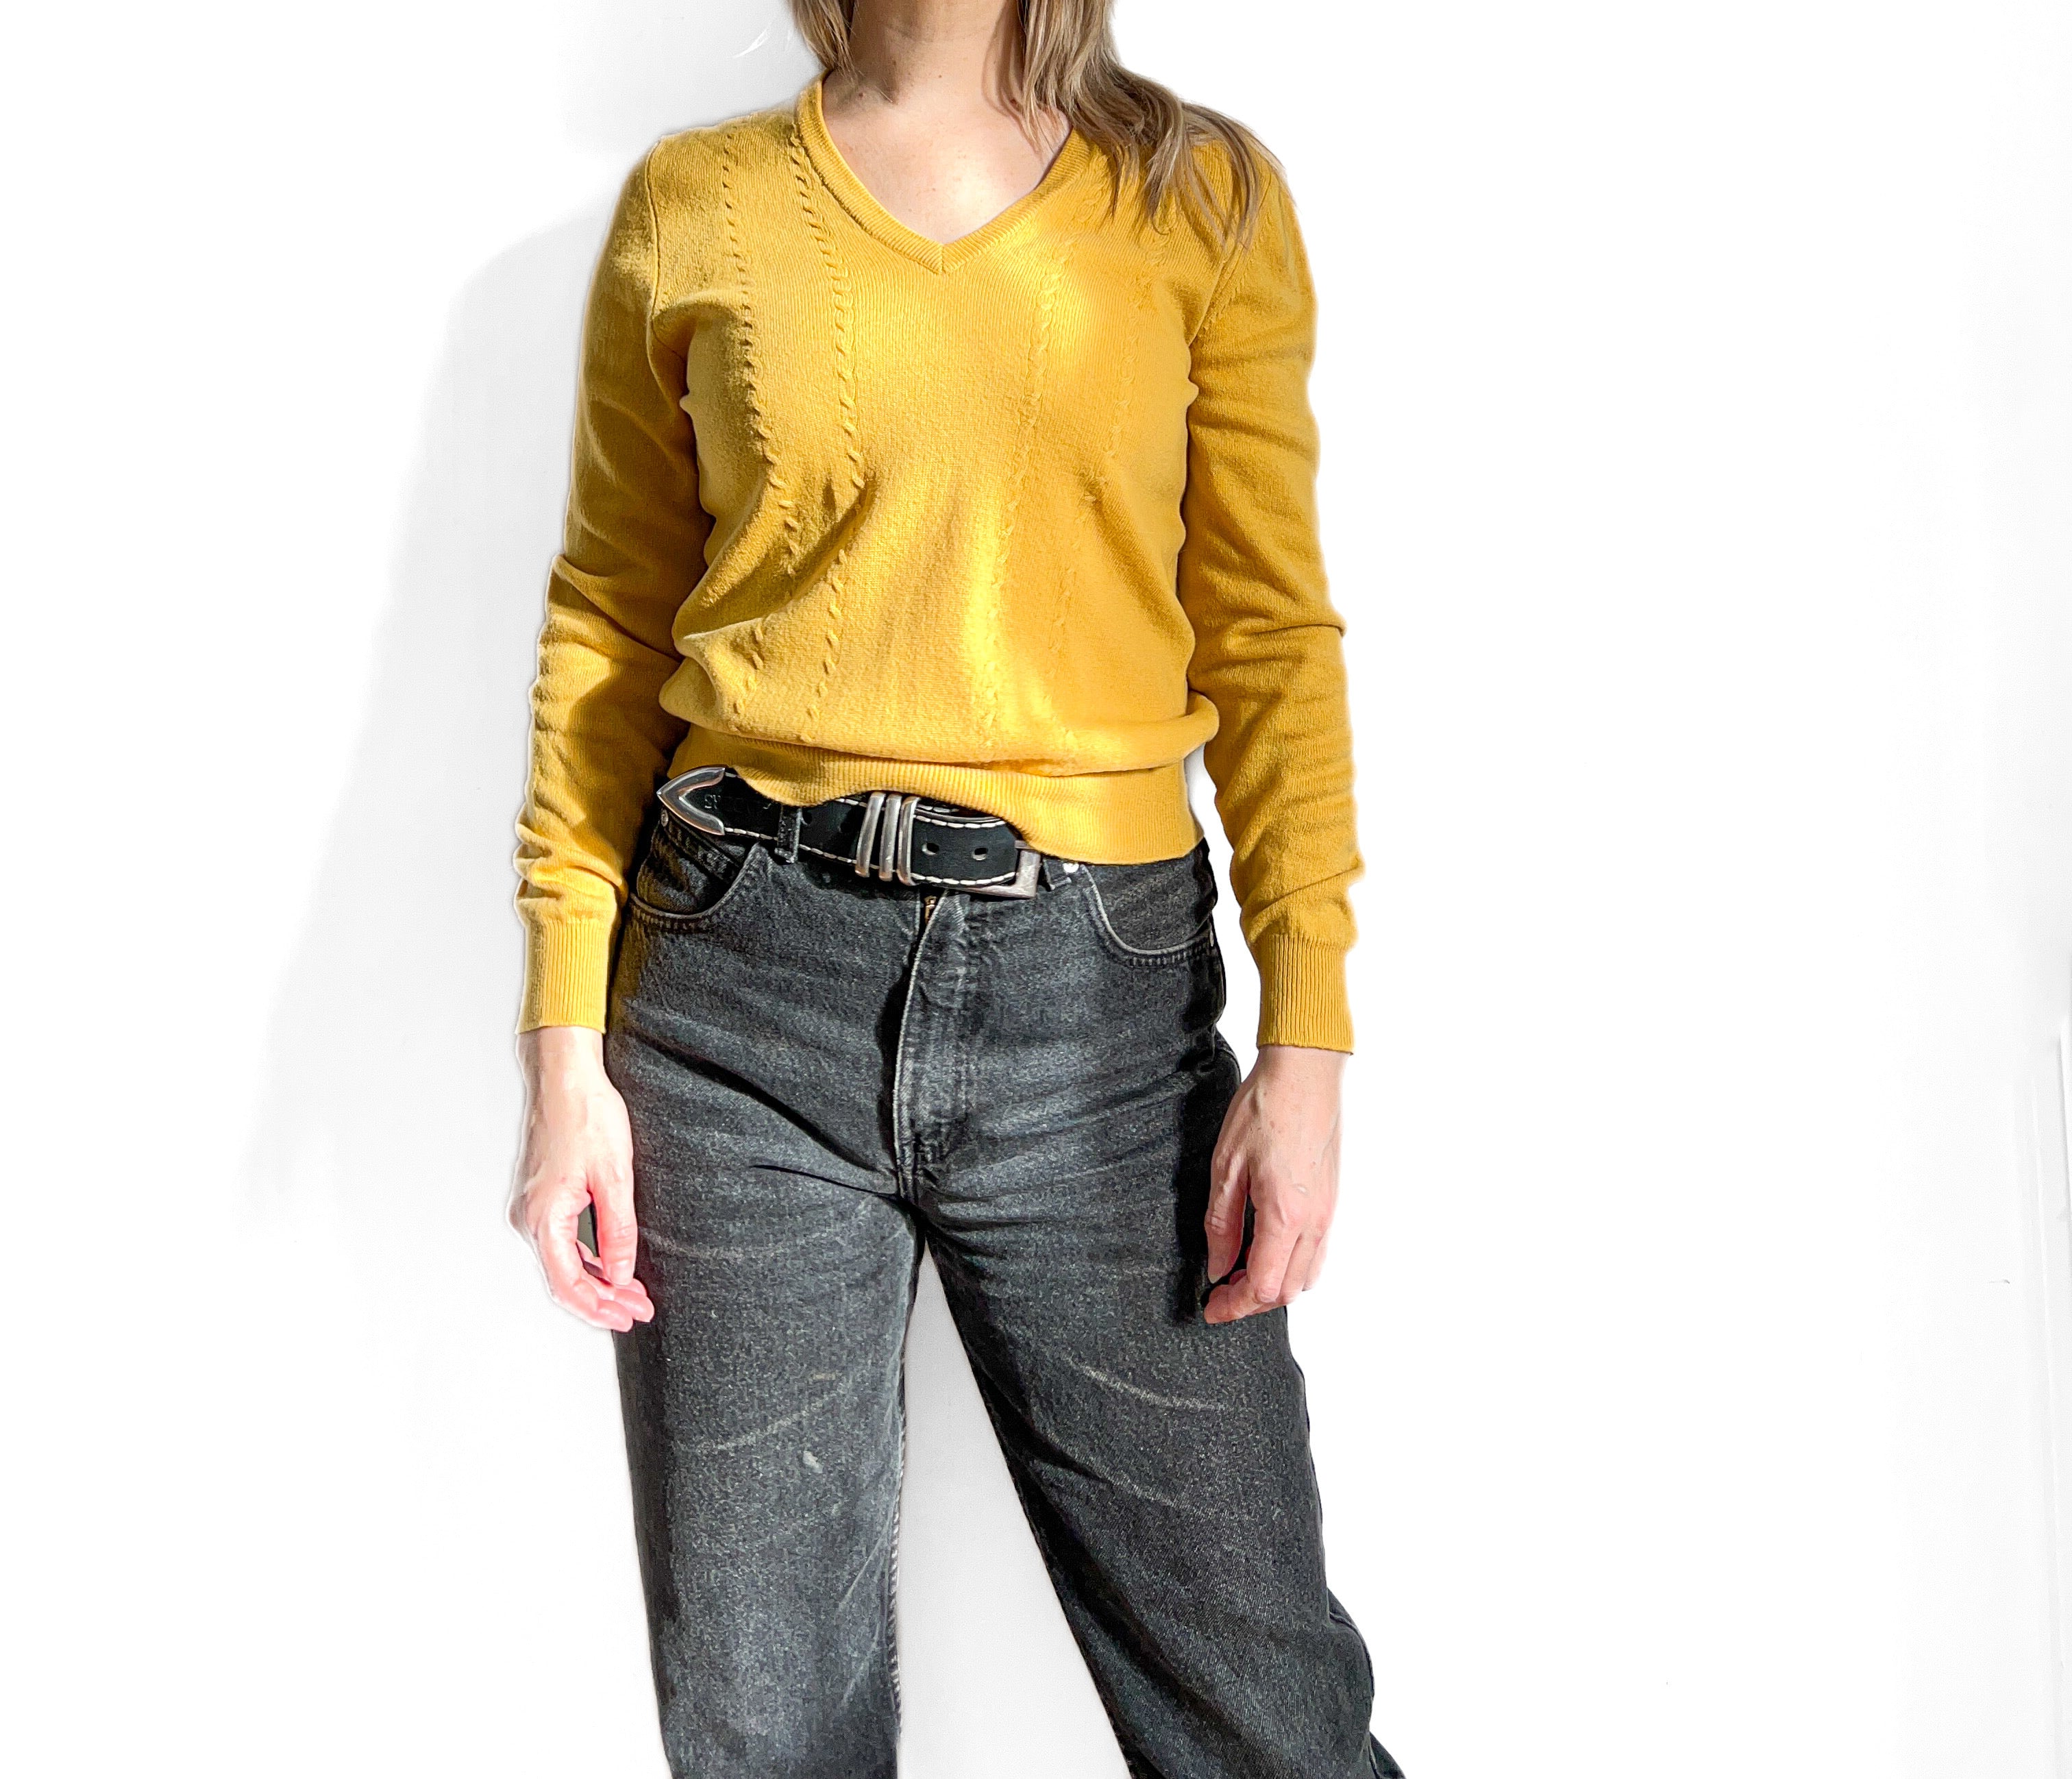 Mustard Yellow Cashmere Sweater, Cable Knit V Neck By Hawico of Scotland for Jenners